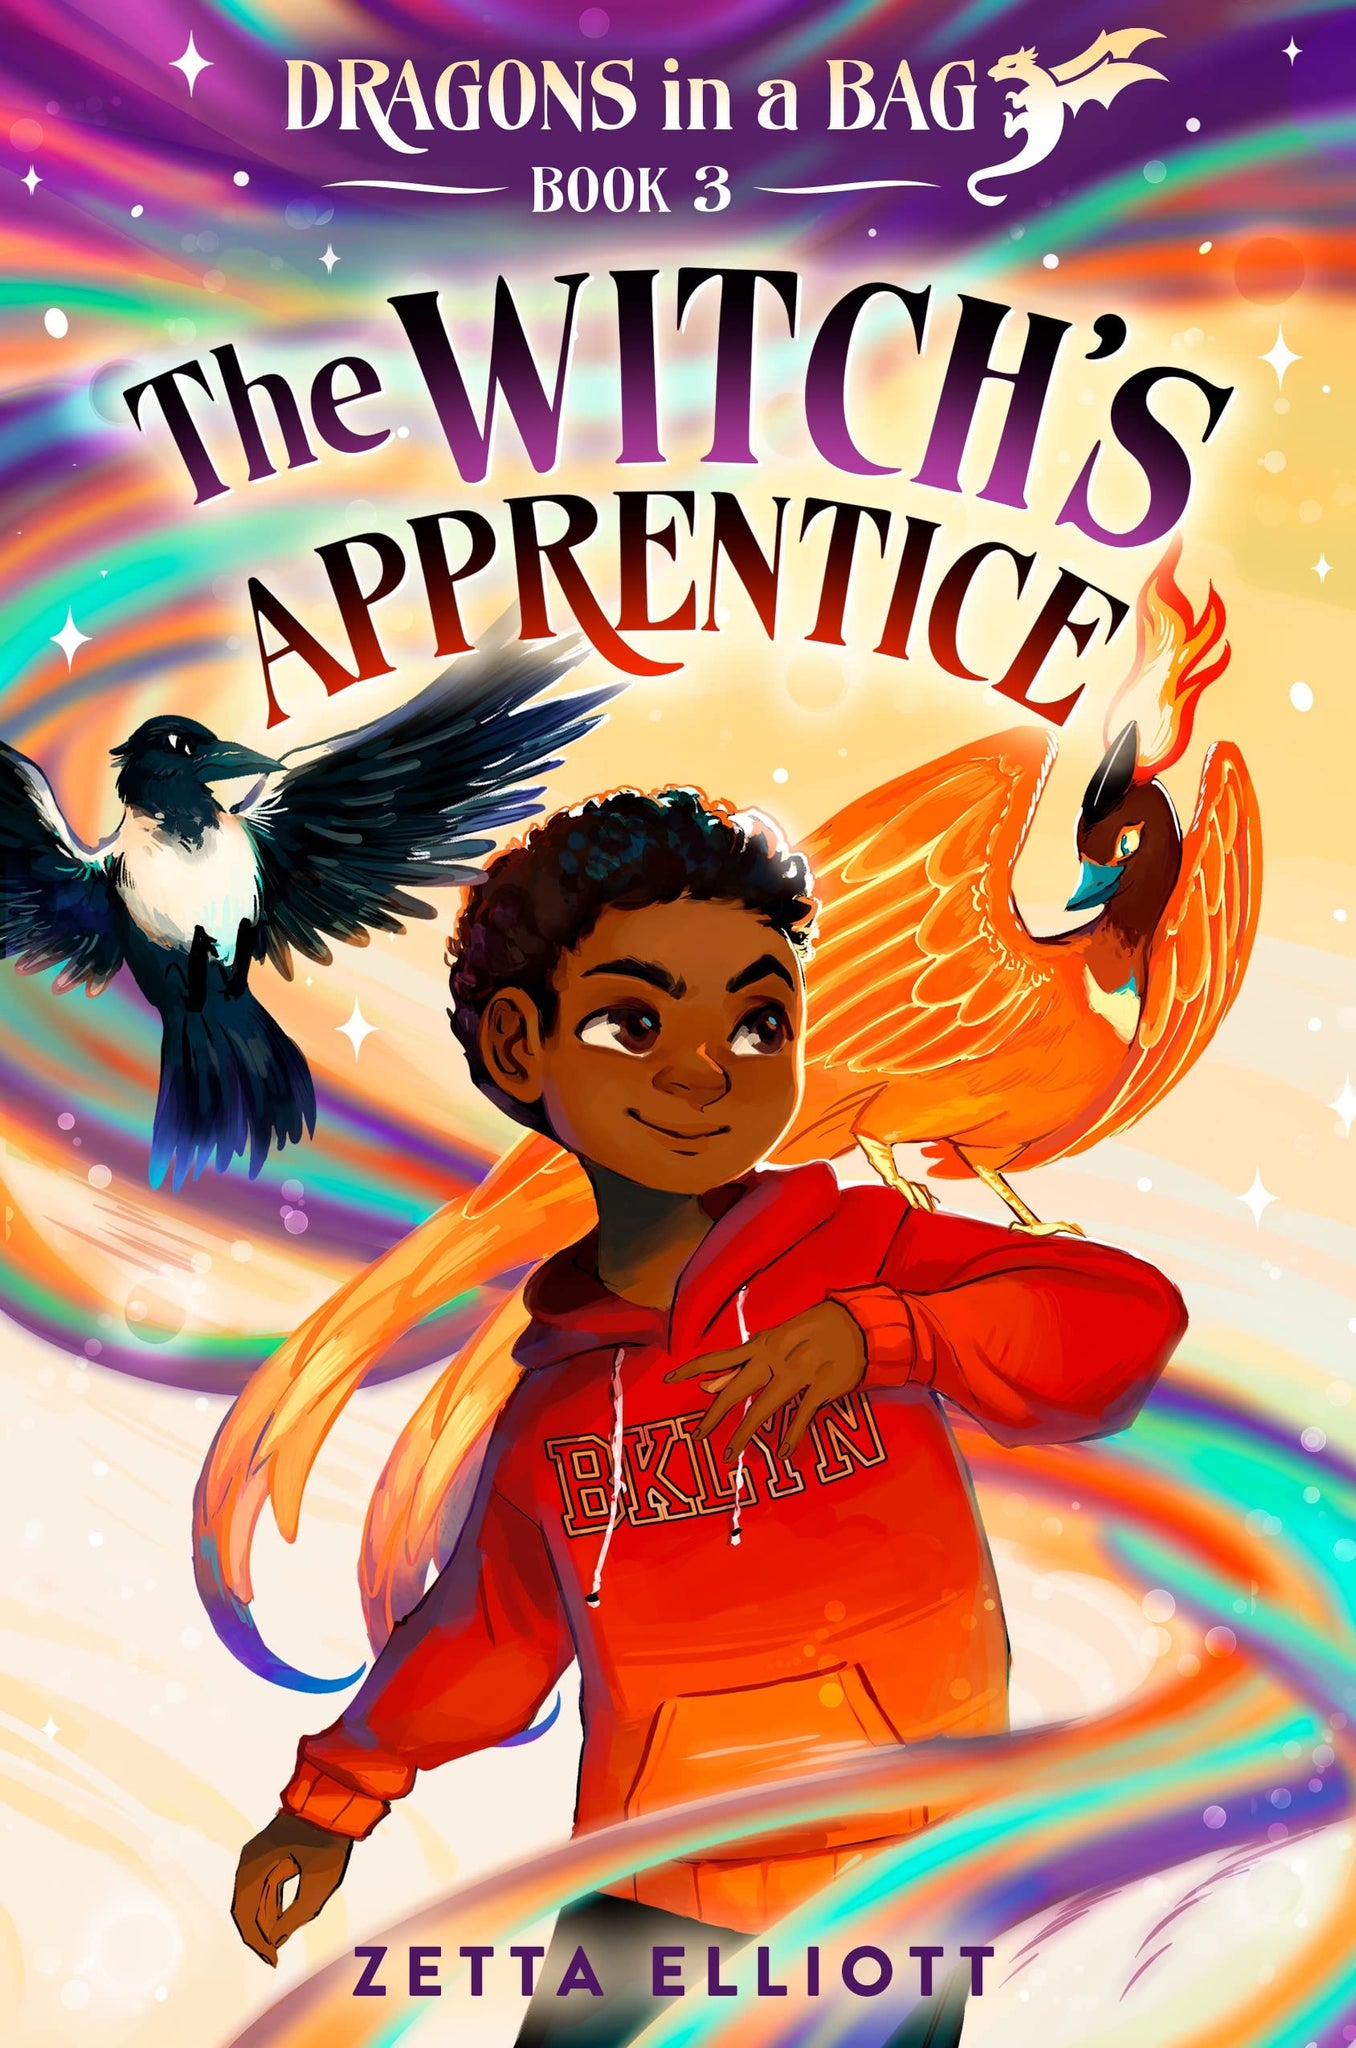 The Witch's Apprentice (Dragons in a Bag: Book 3) by Zetta Elliot